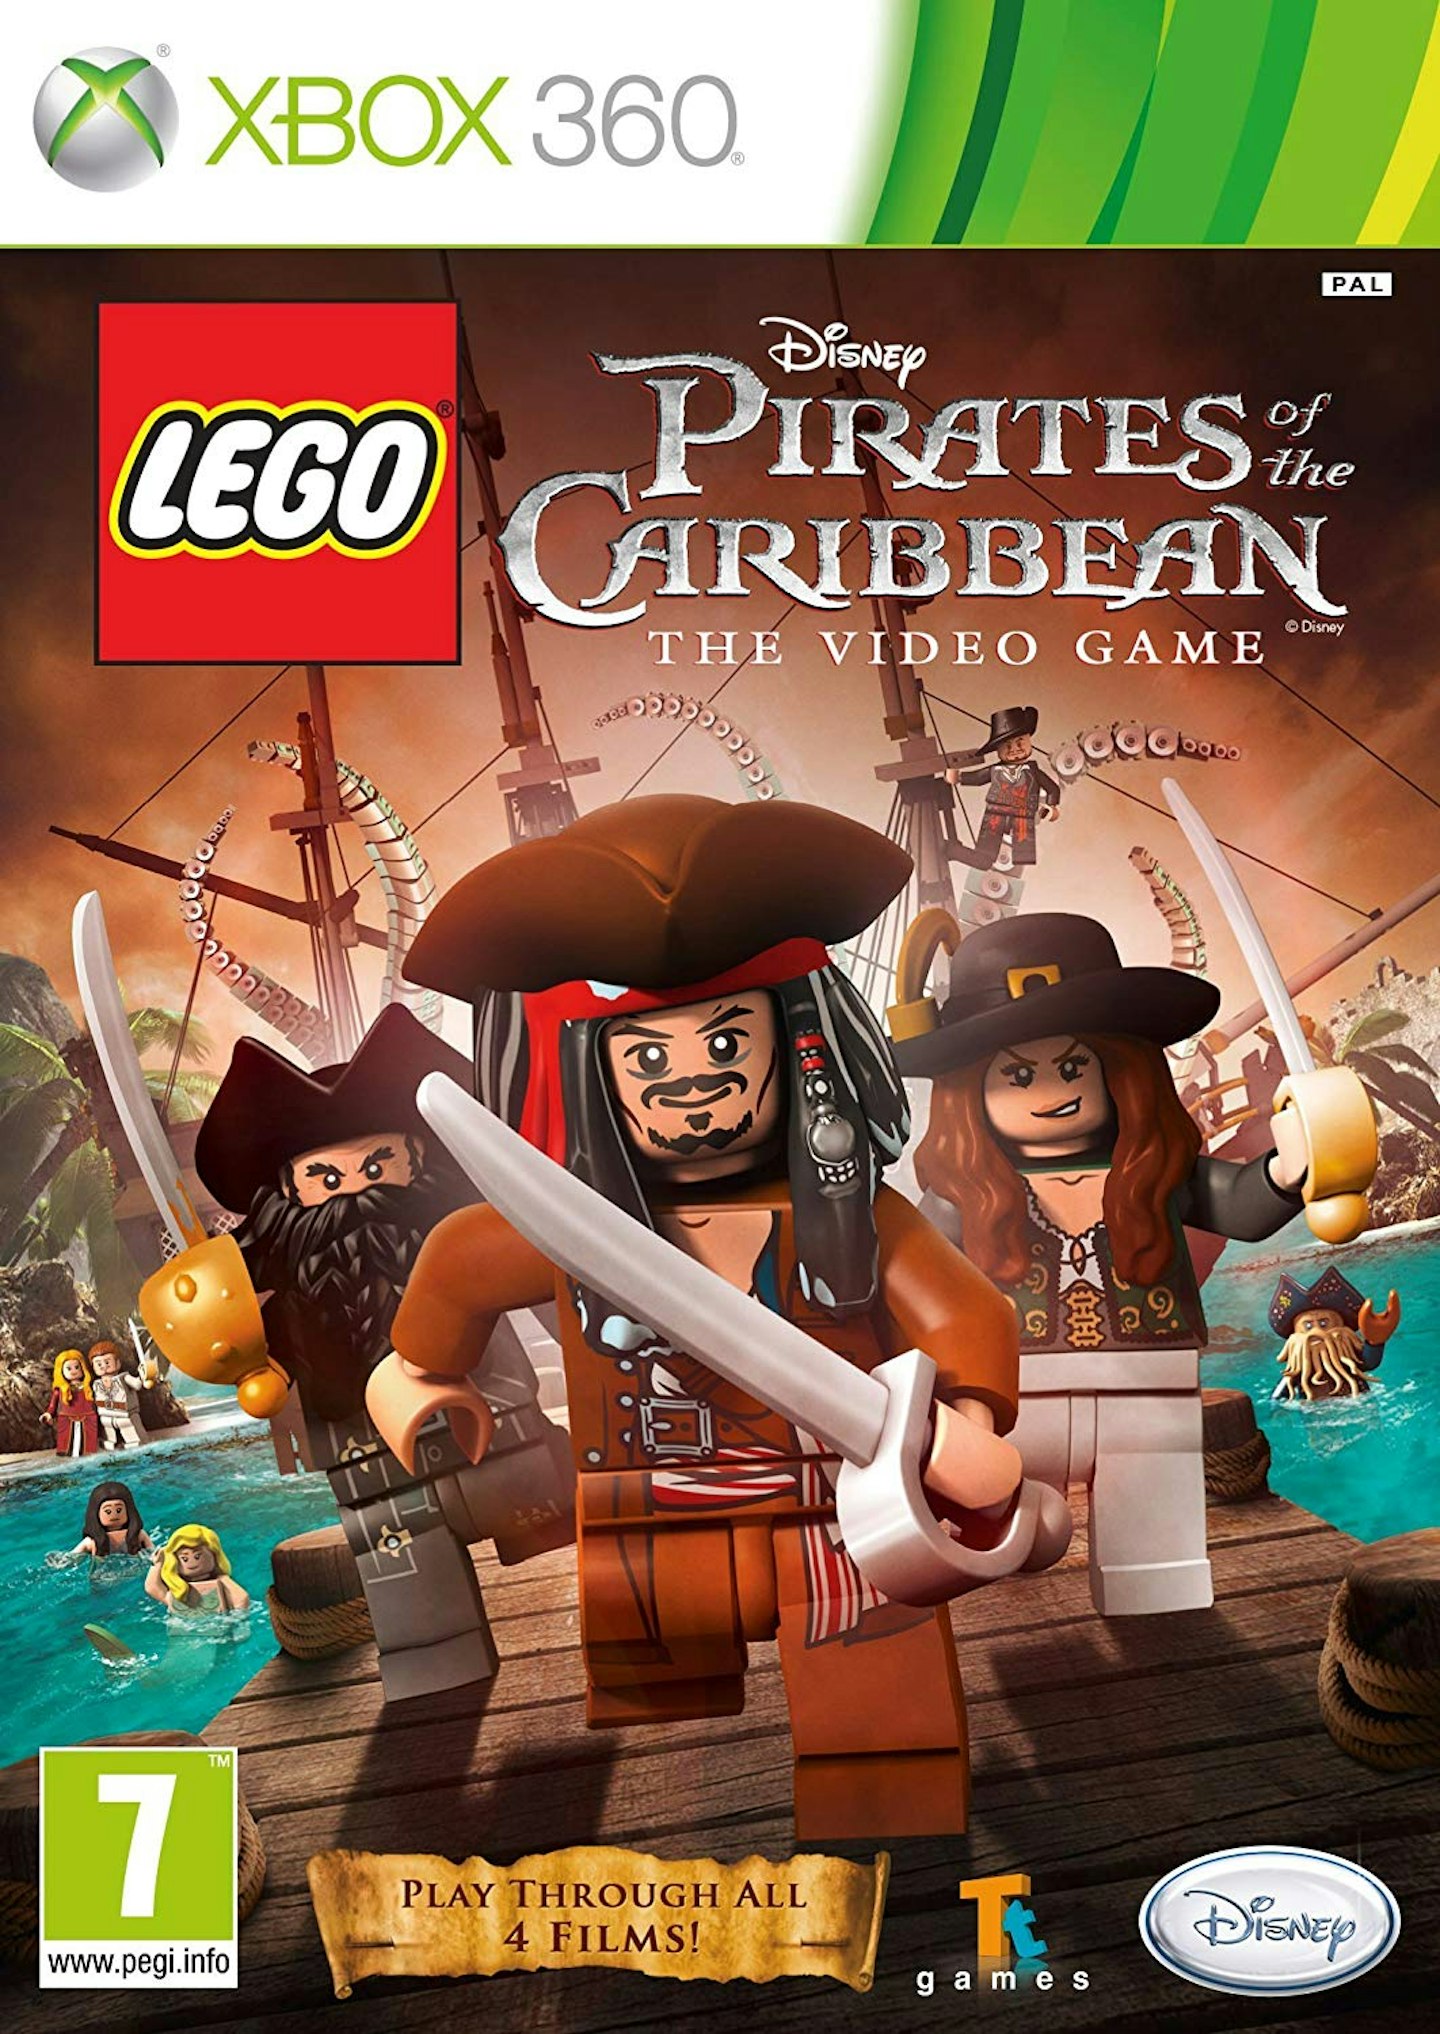 Lego Pirates of the Caribbean (2011)